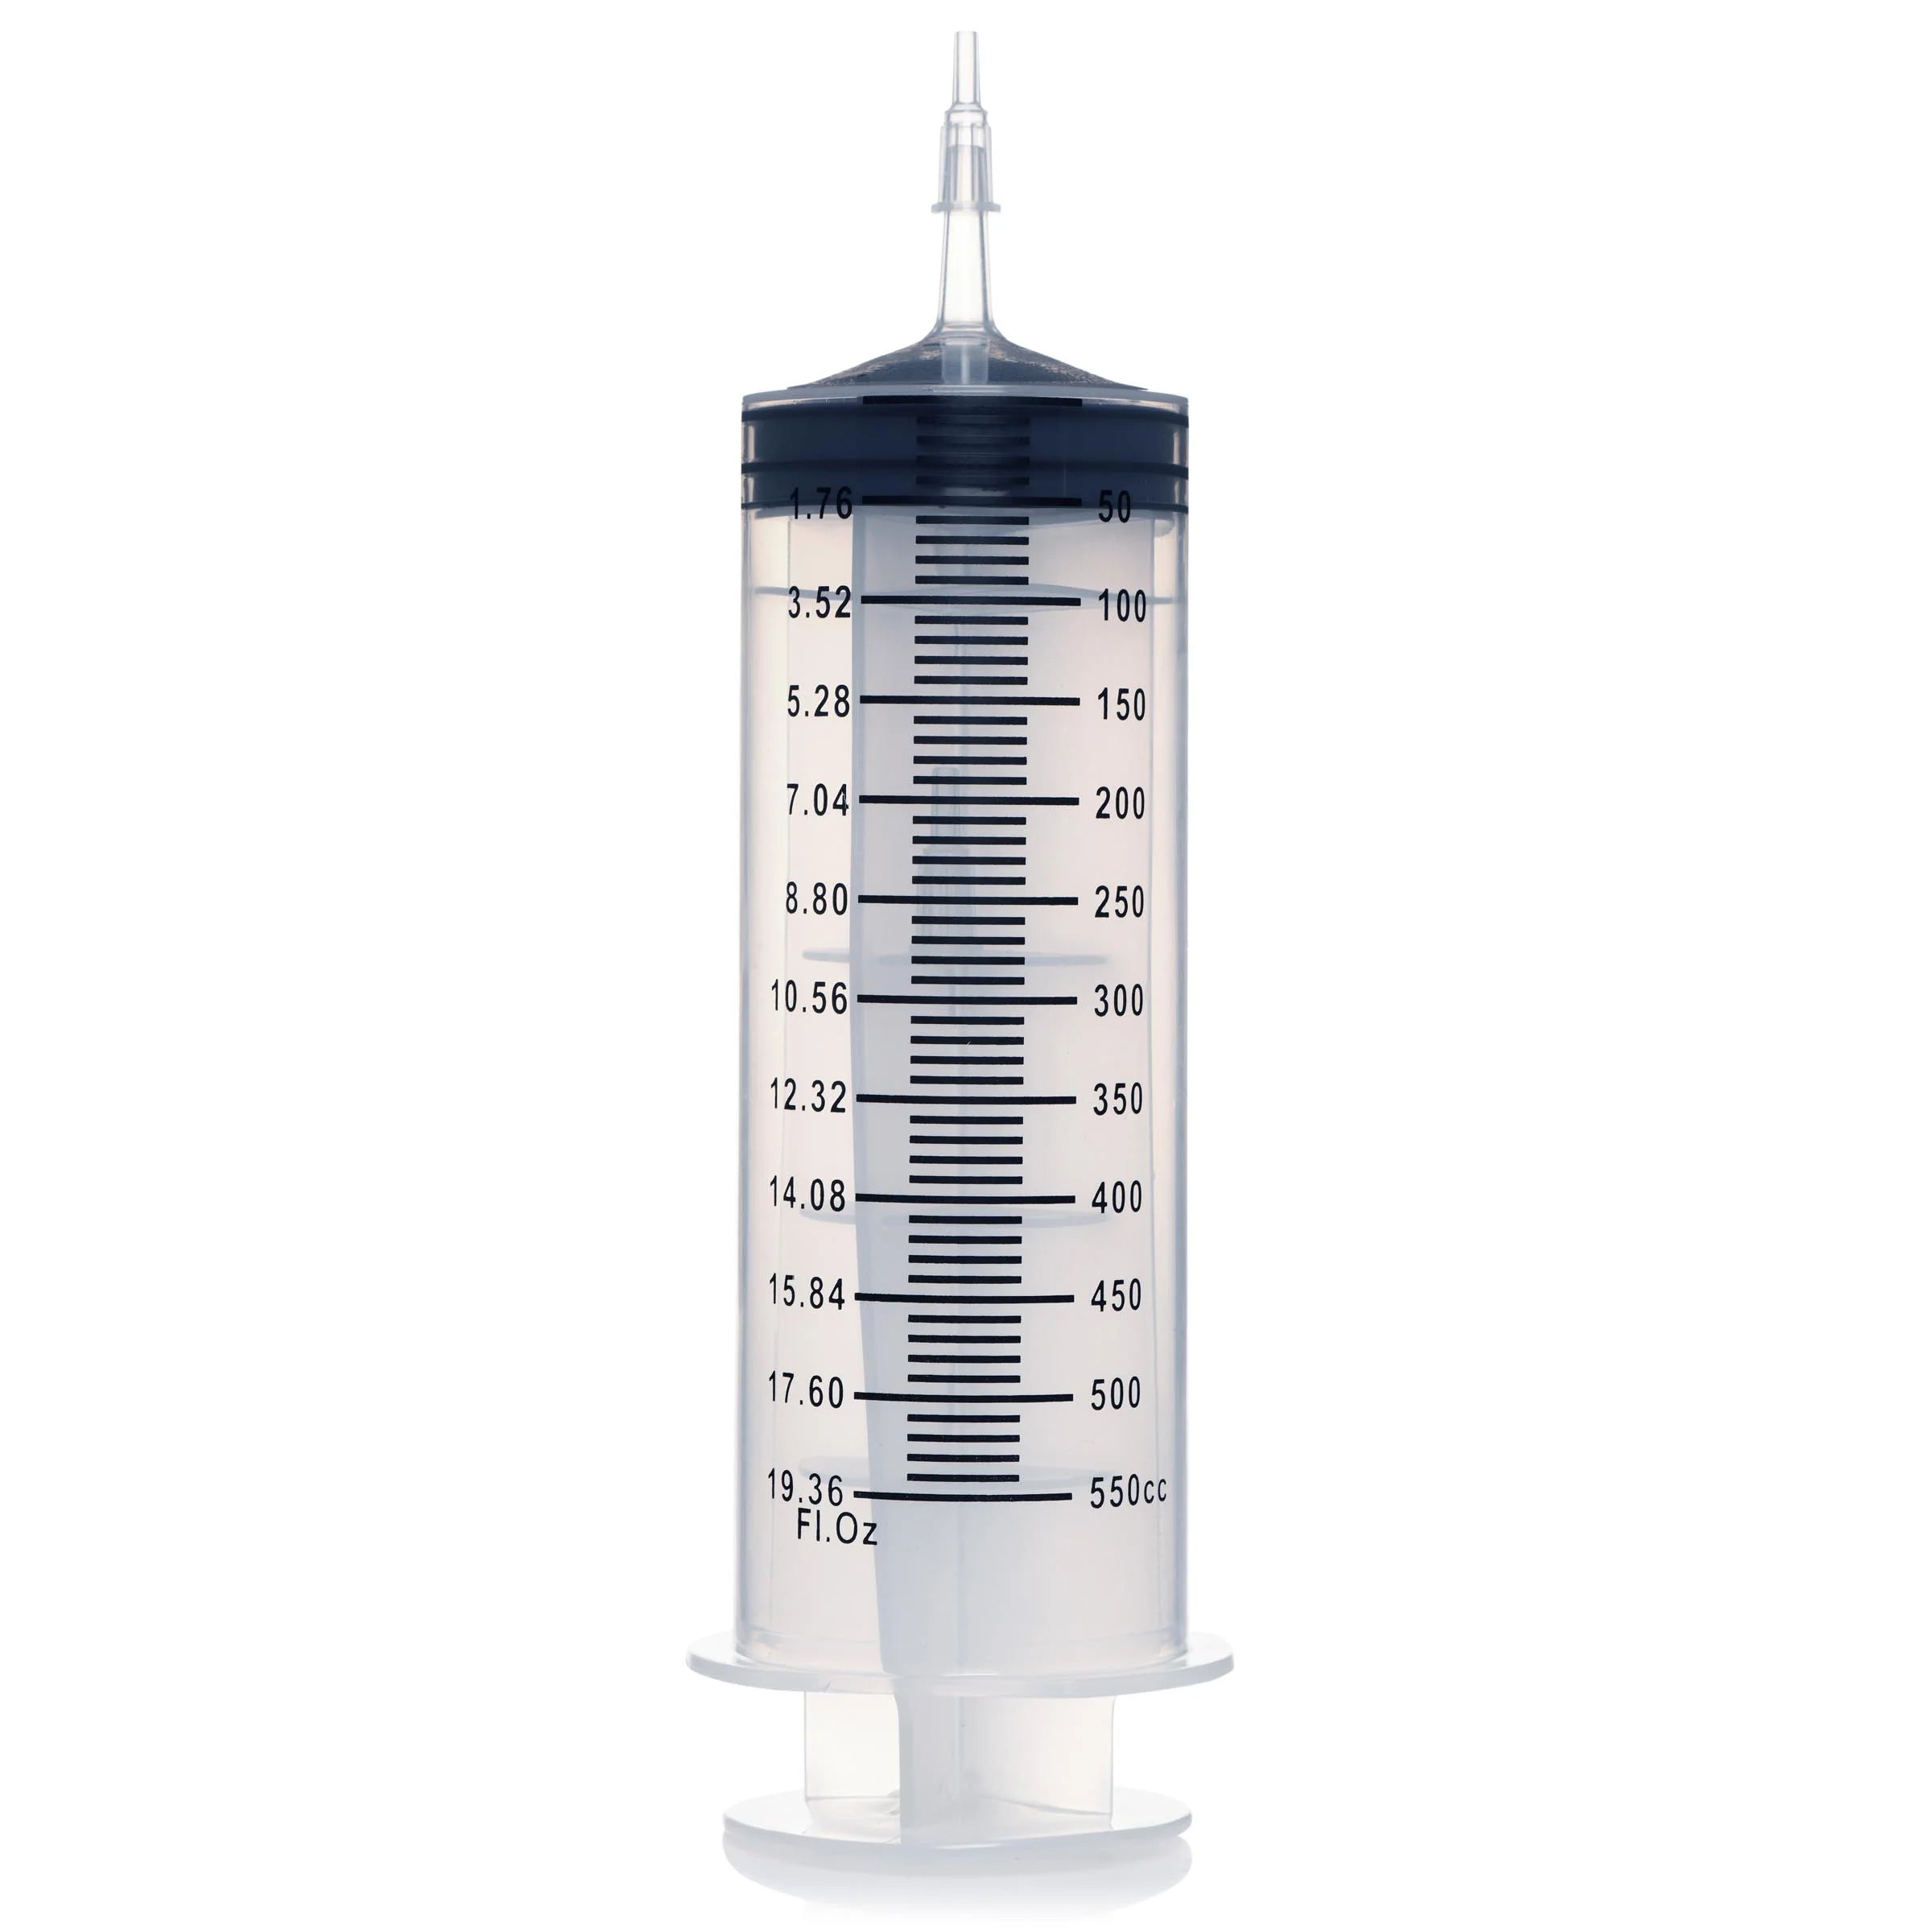 CleanStream Enema Syringe • Anal Cleansing System